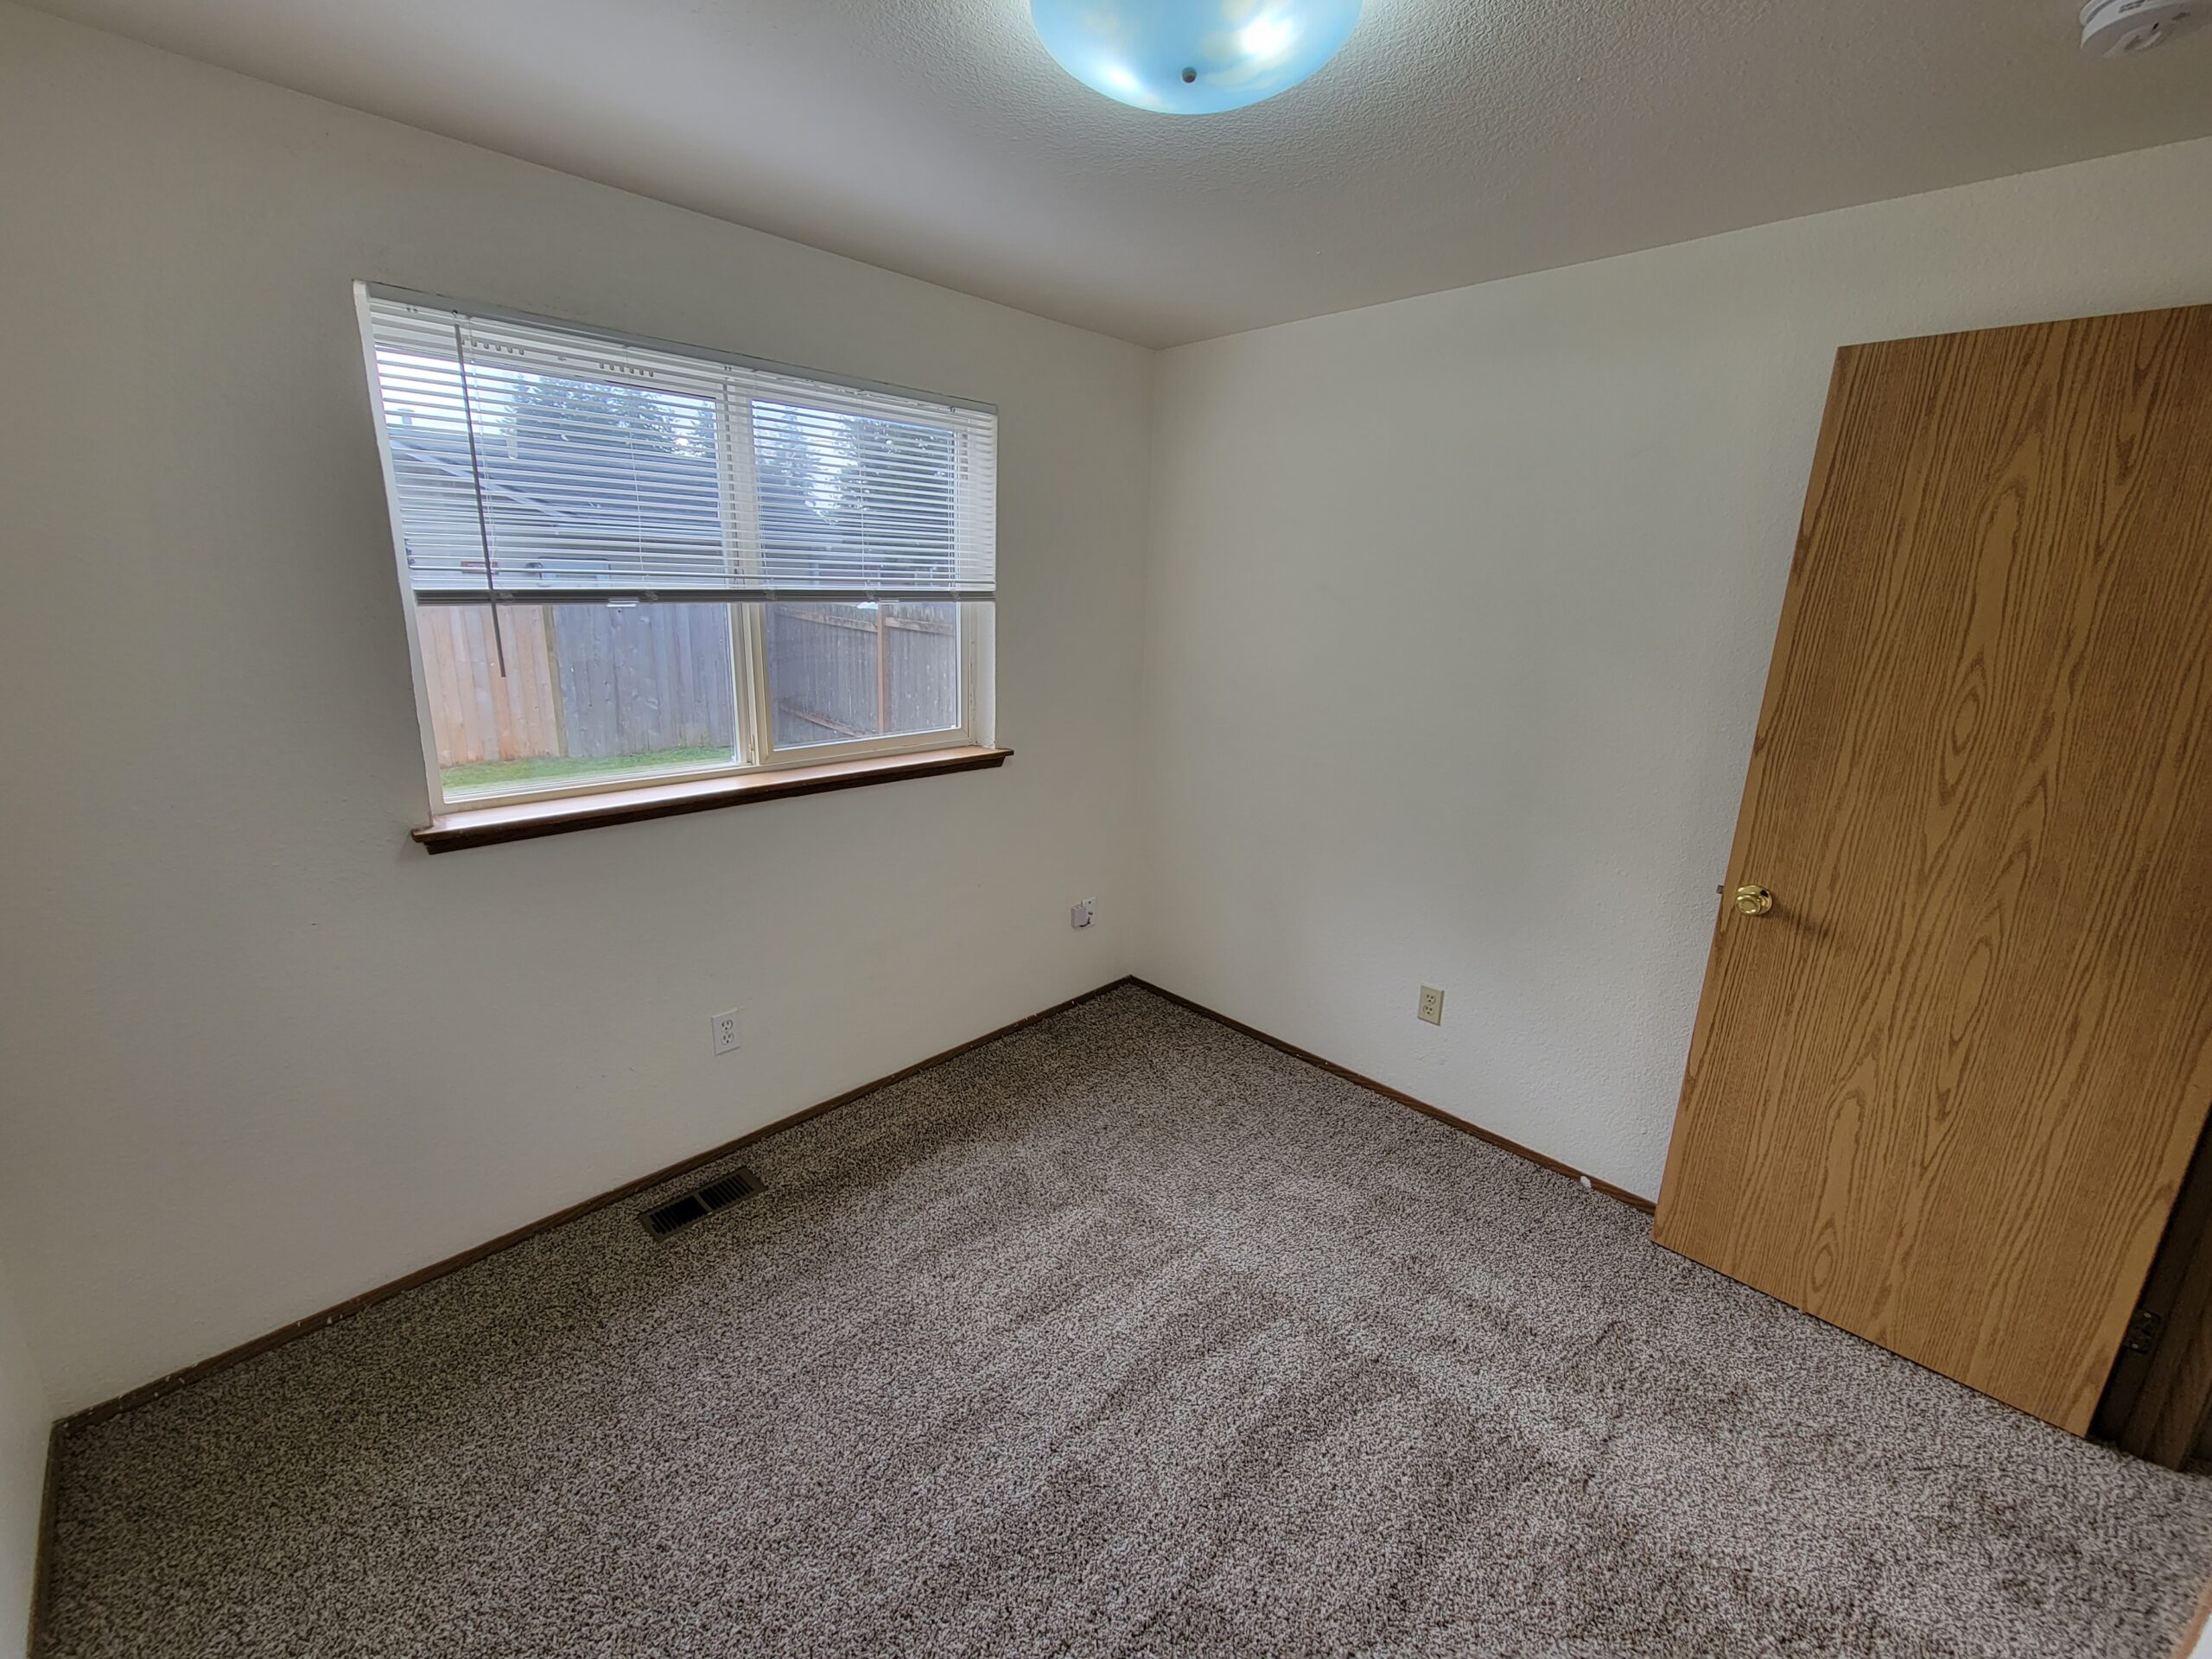 3 Bed 2 Bath with fresh paint and carpet!